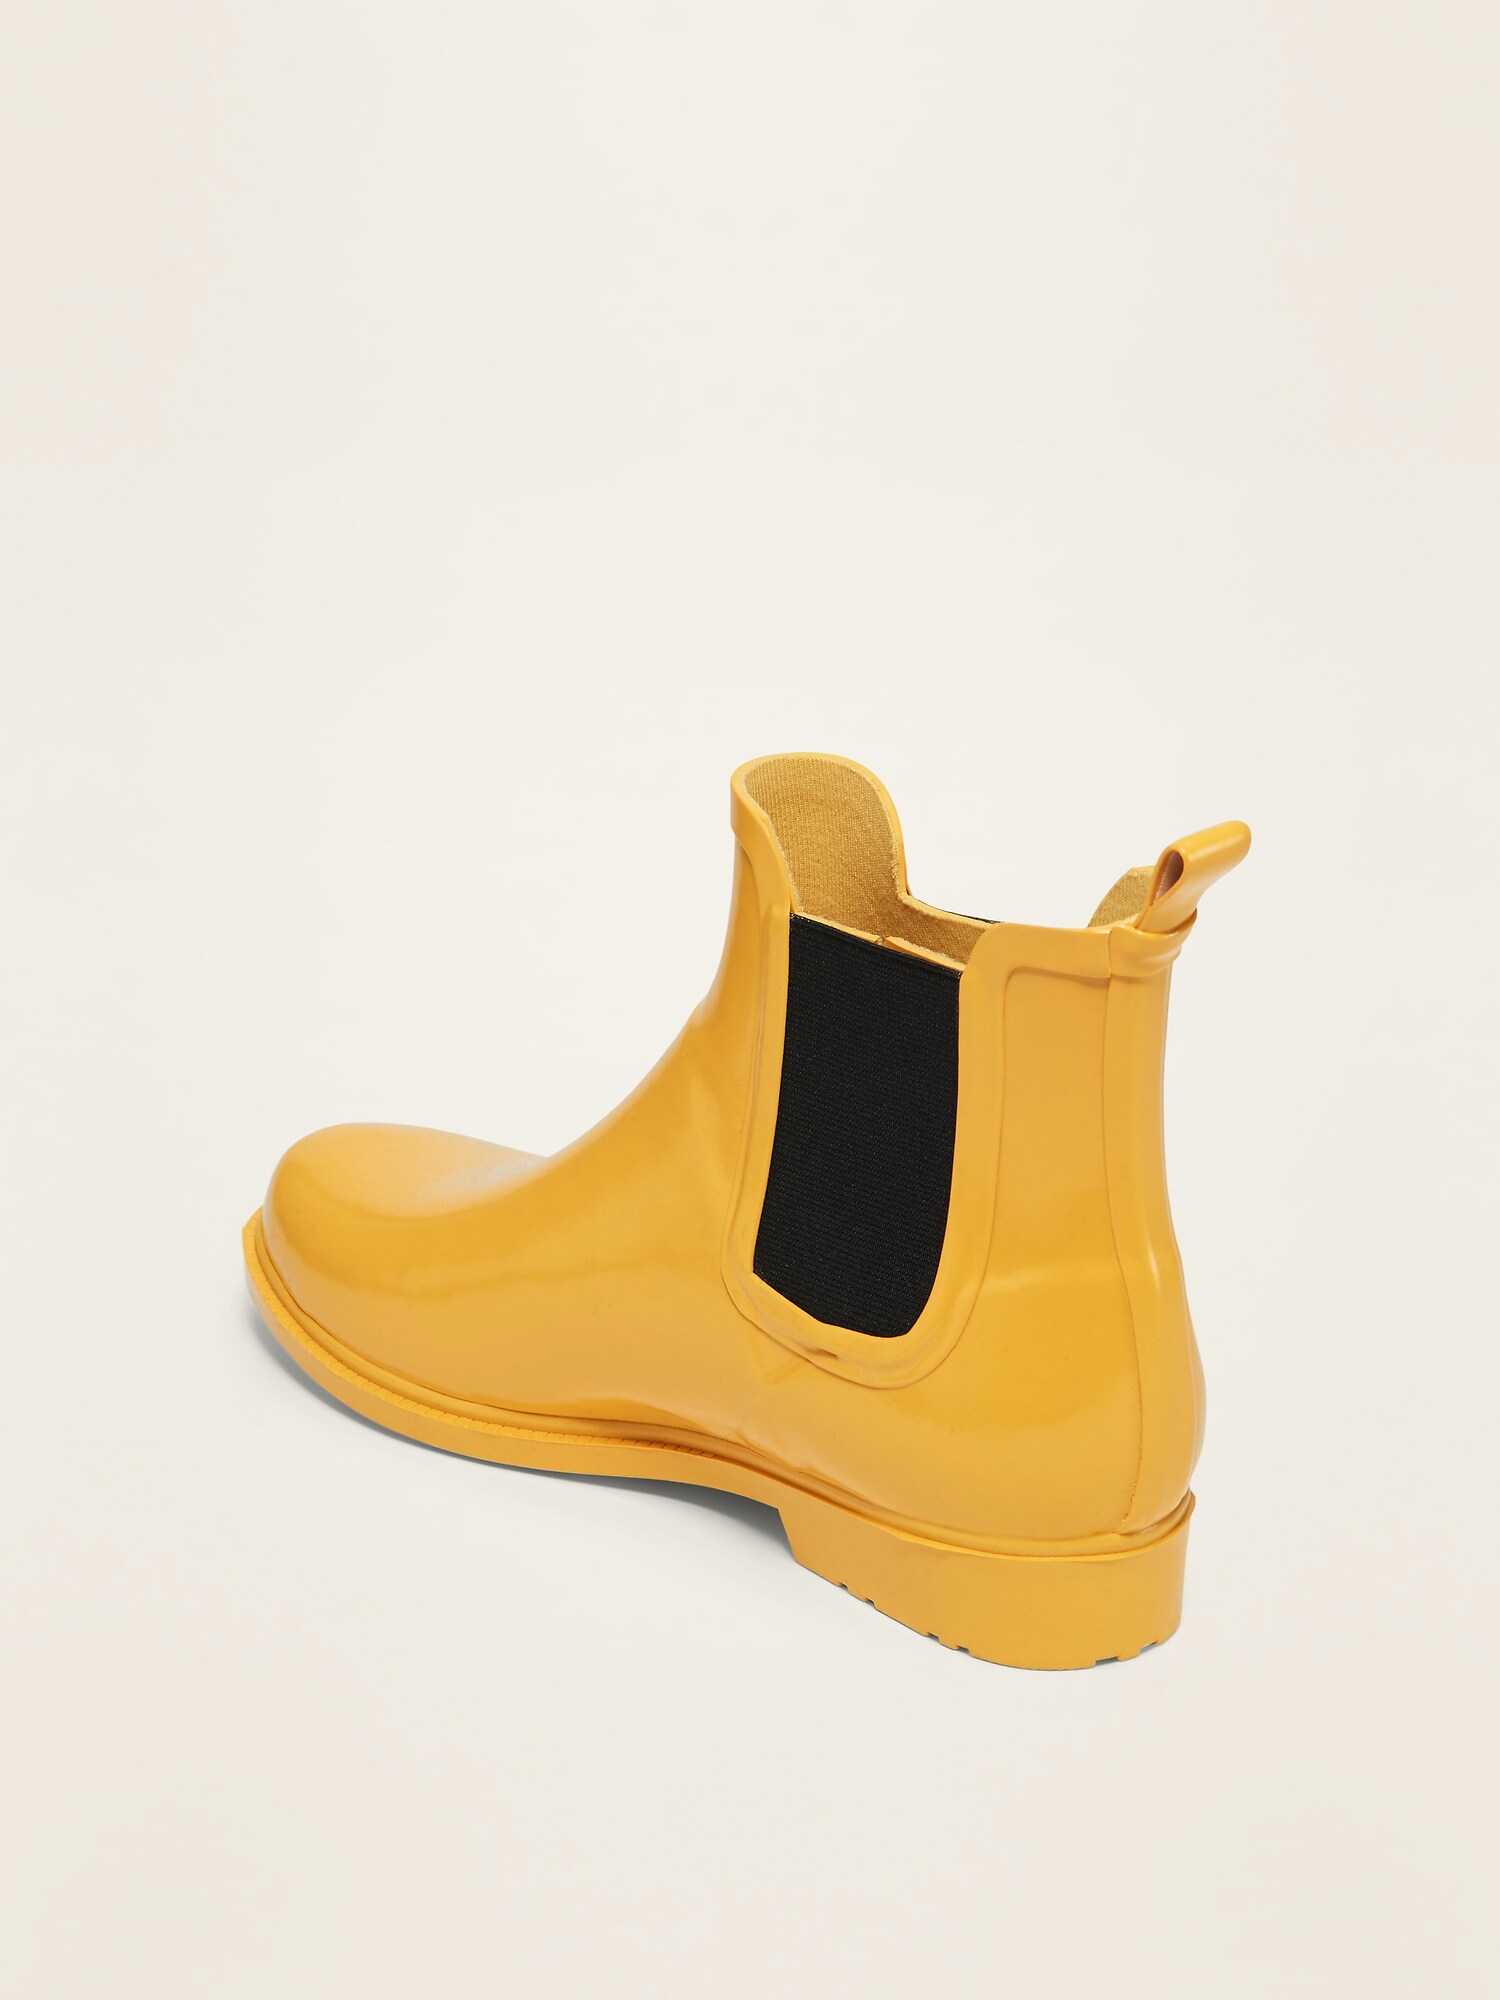 mustard coloured boots